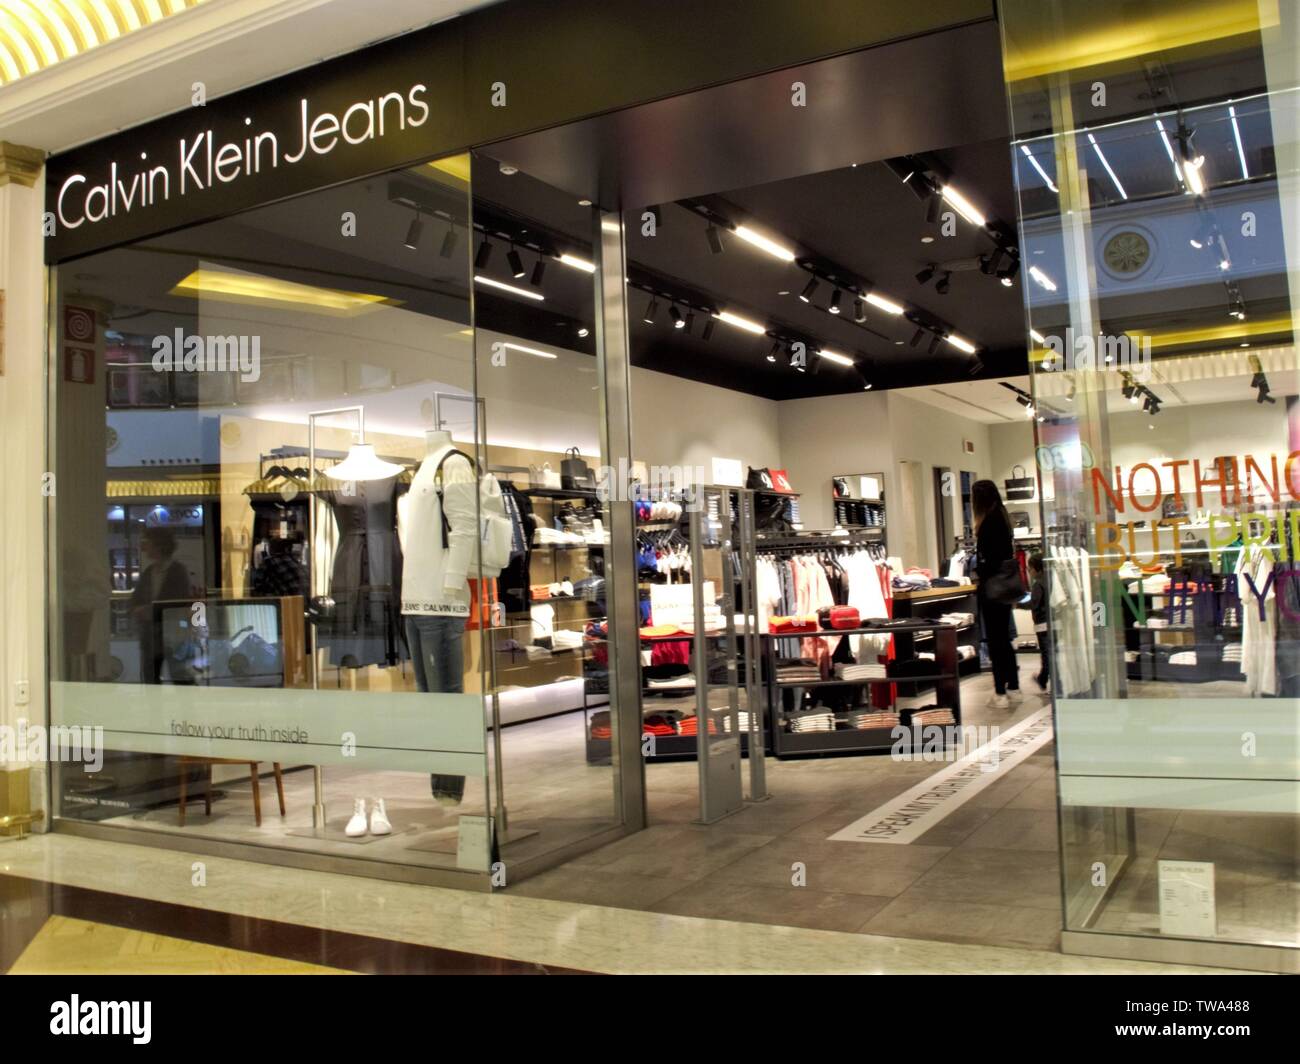 CALVIN KLEIN JEANS FASHION STORE ENTRANCE IN EUROMA 2 SHOPPING CENTER IN  ROME Stock Photo - Alamy